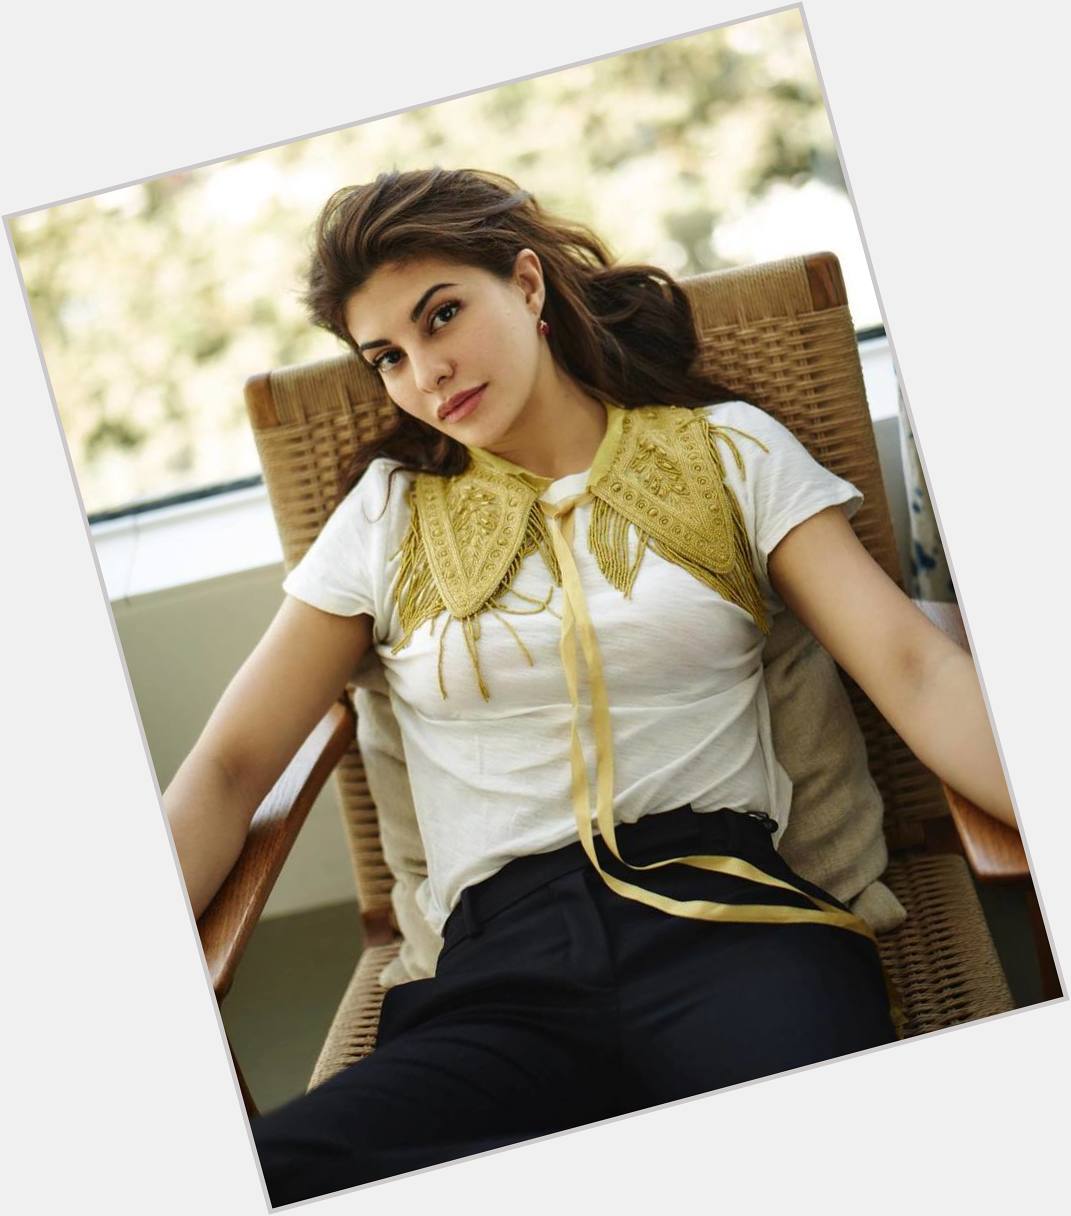 Happy Birthday Jacqueline Fernandez: 10 photos which show she is leading a rocking life  